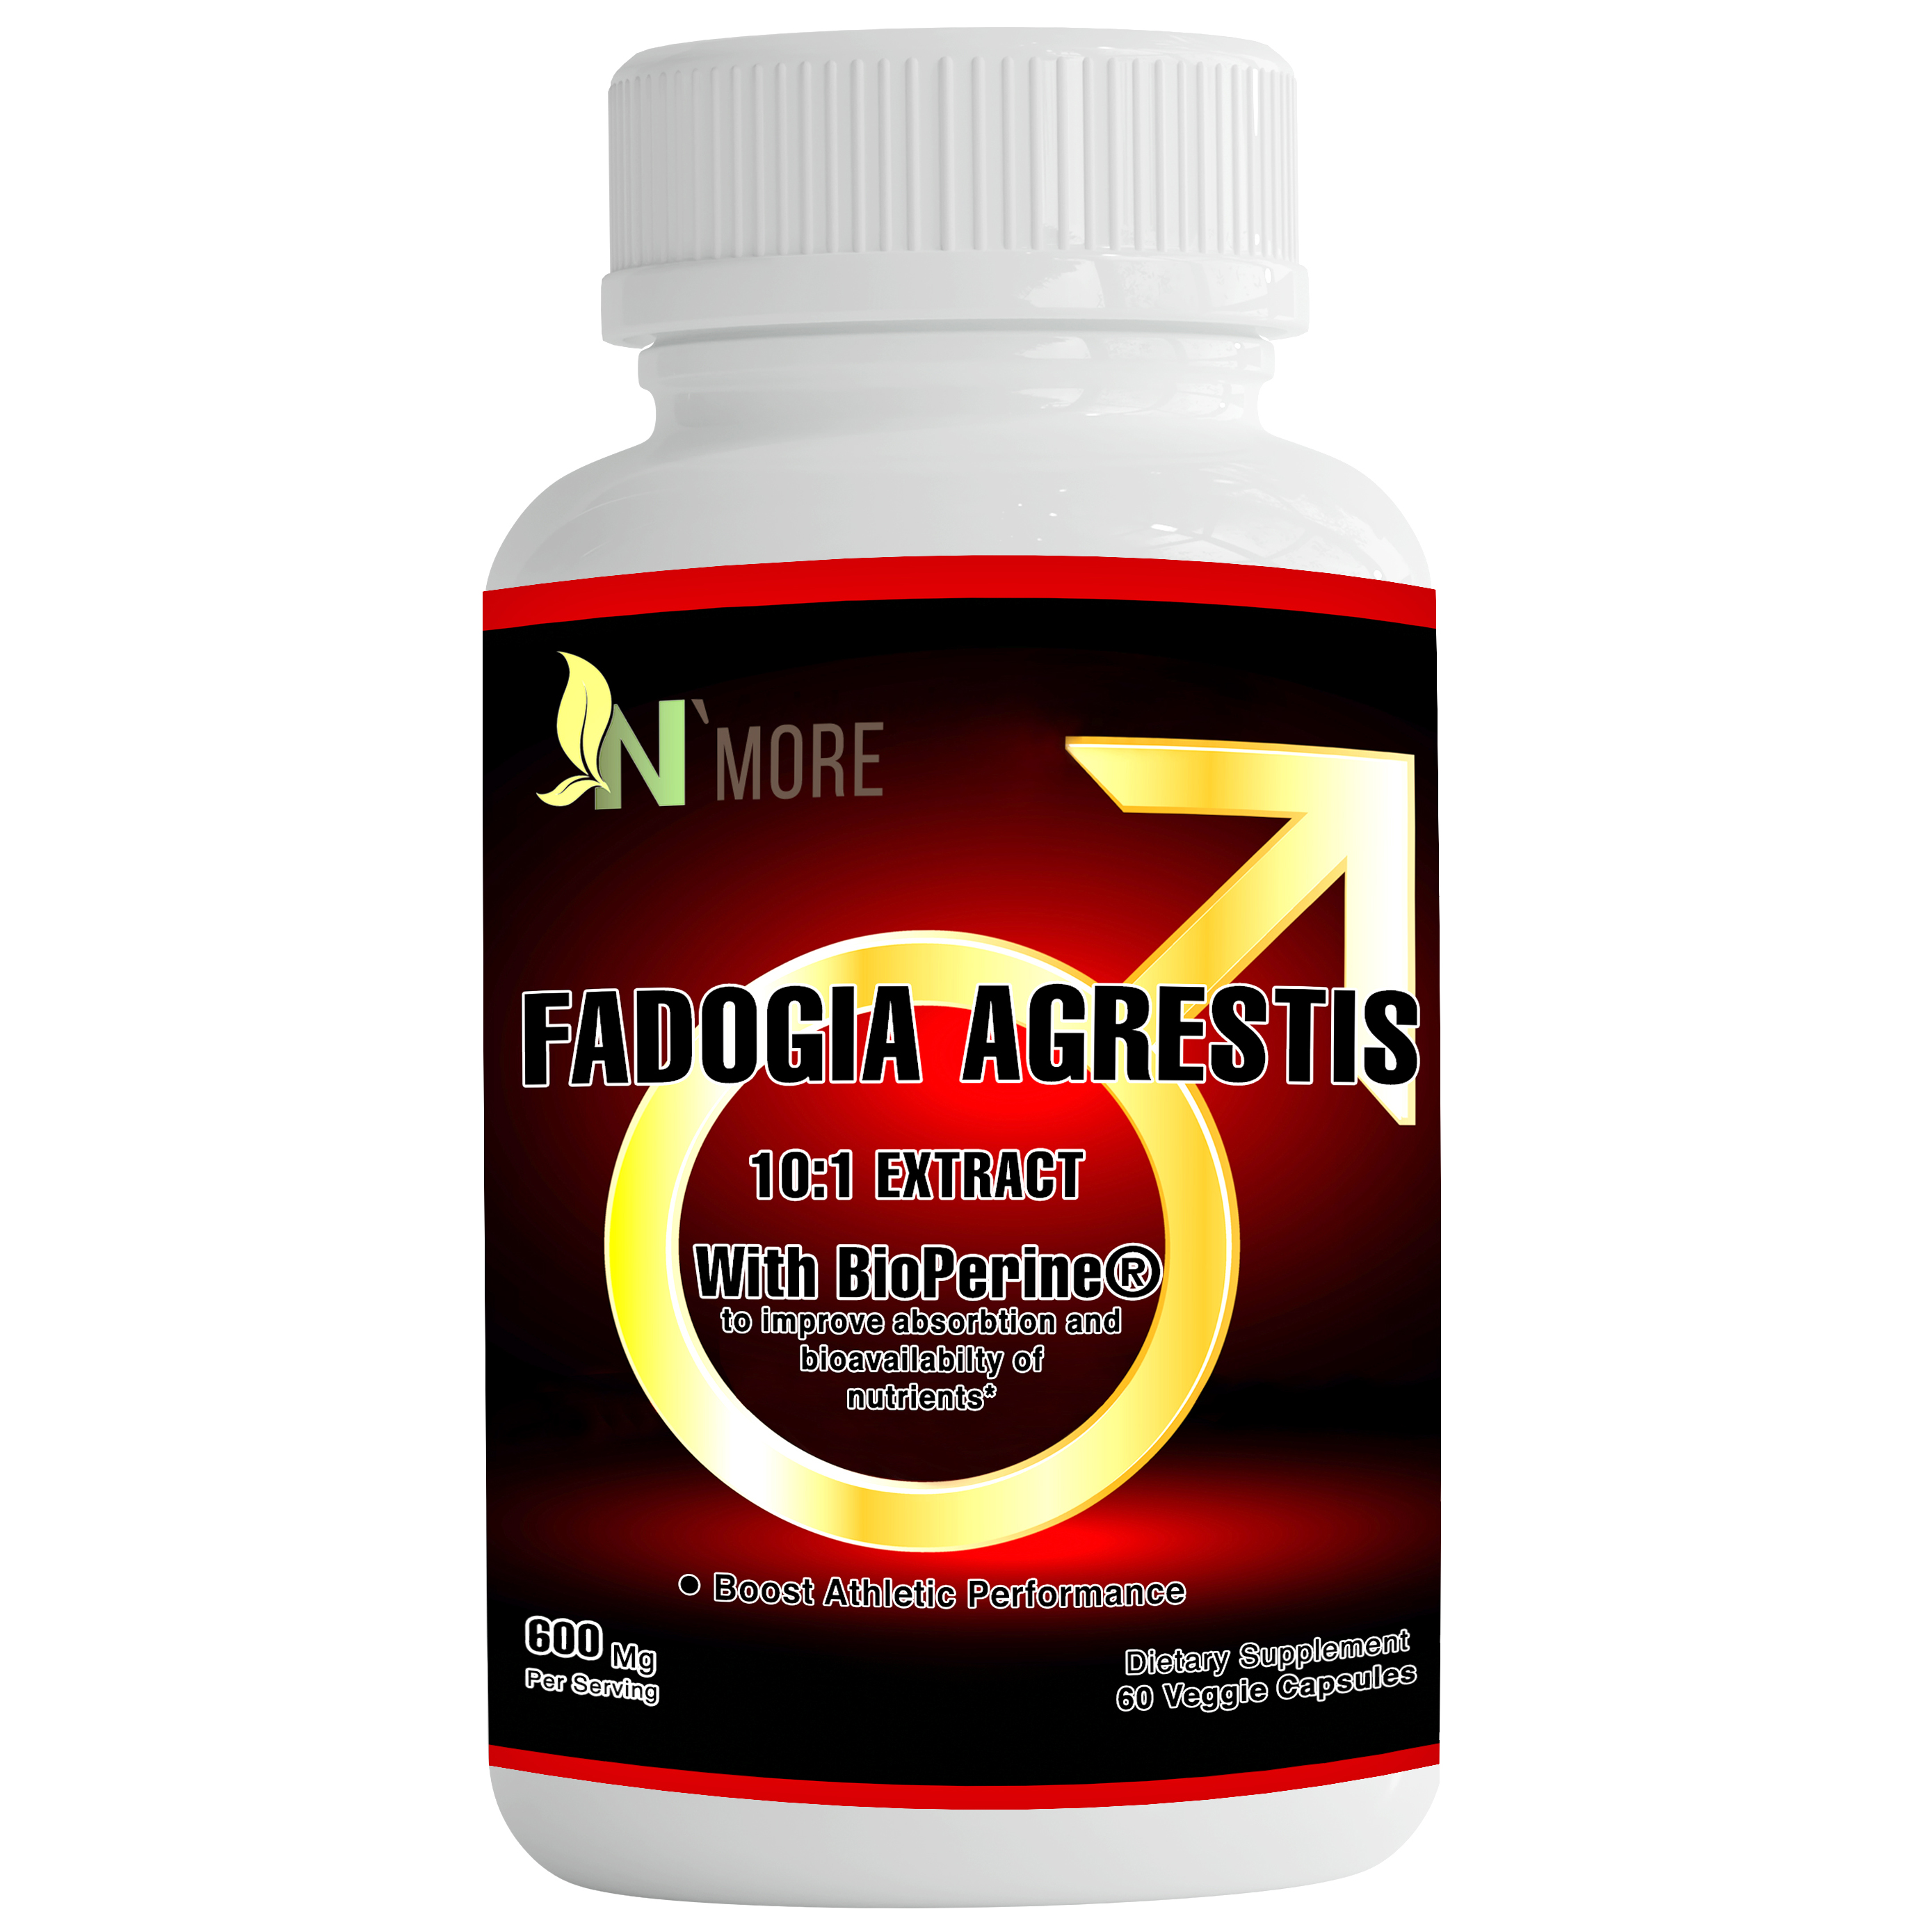 Fadogia Agrestis Extract 10:1 - 60 600mg Vegicaps - Stearate Free - image 1 of 4